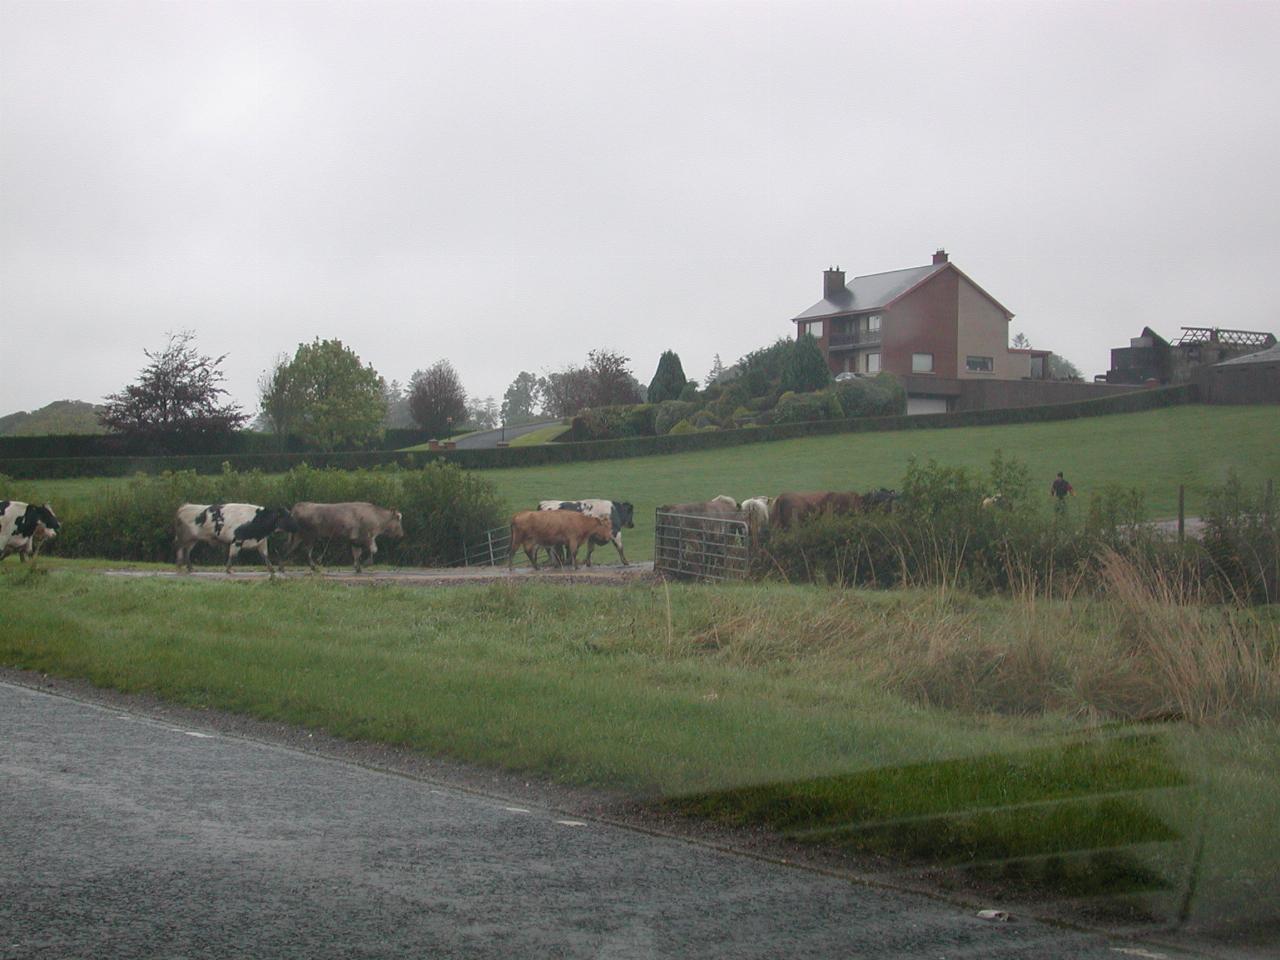 Near Fivemiletown, Northern Ireland: traffic stopped for cow crossing